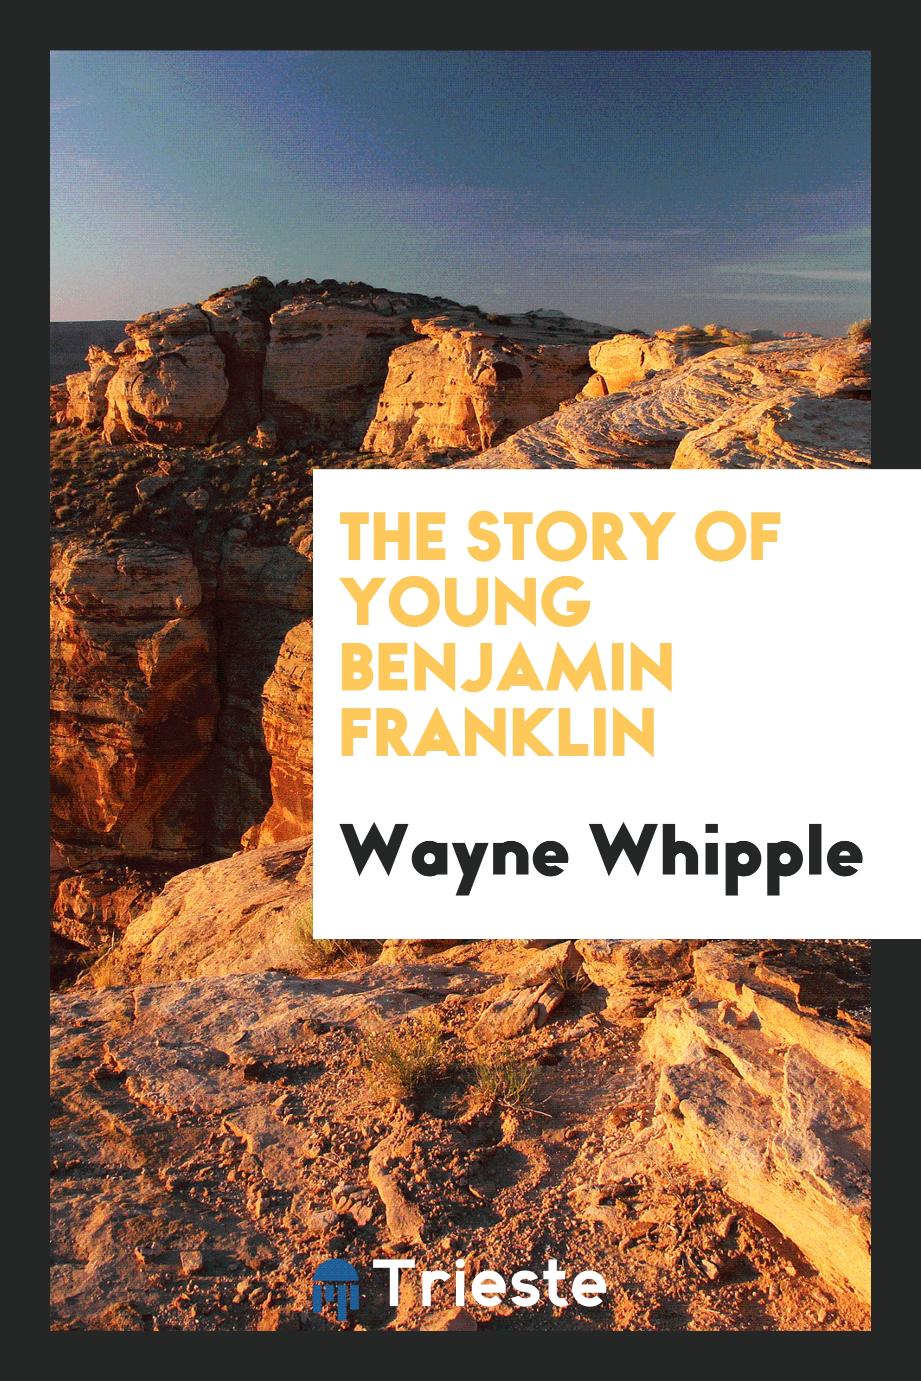 The story of young Benjamin Franklin